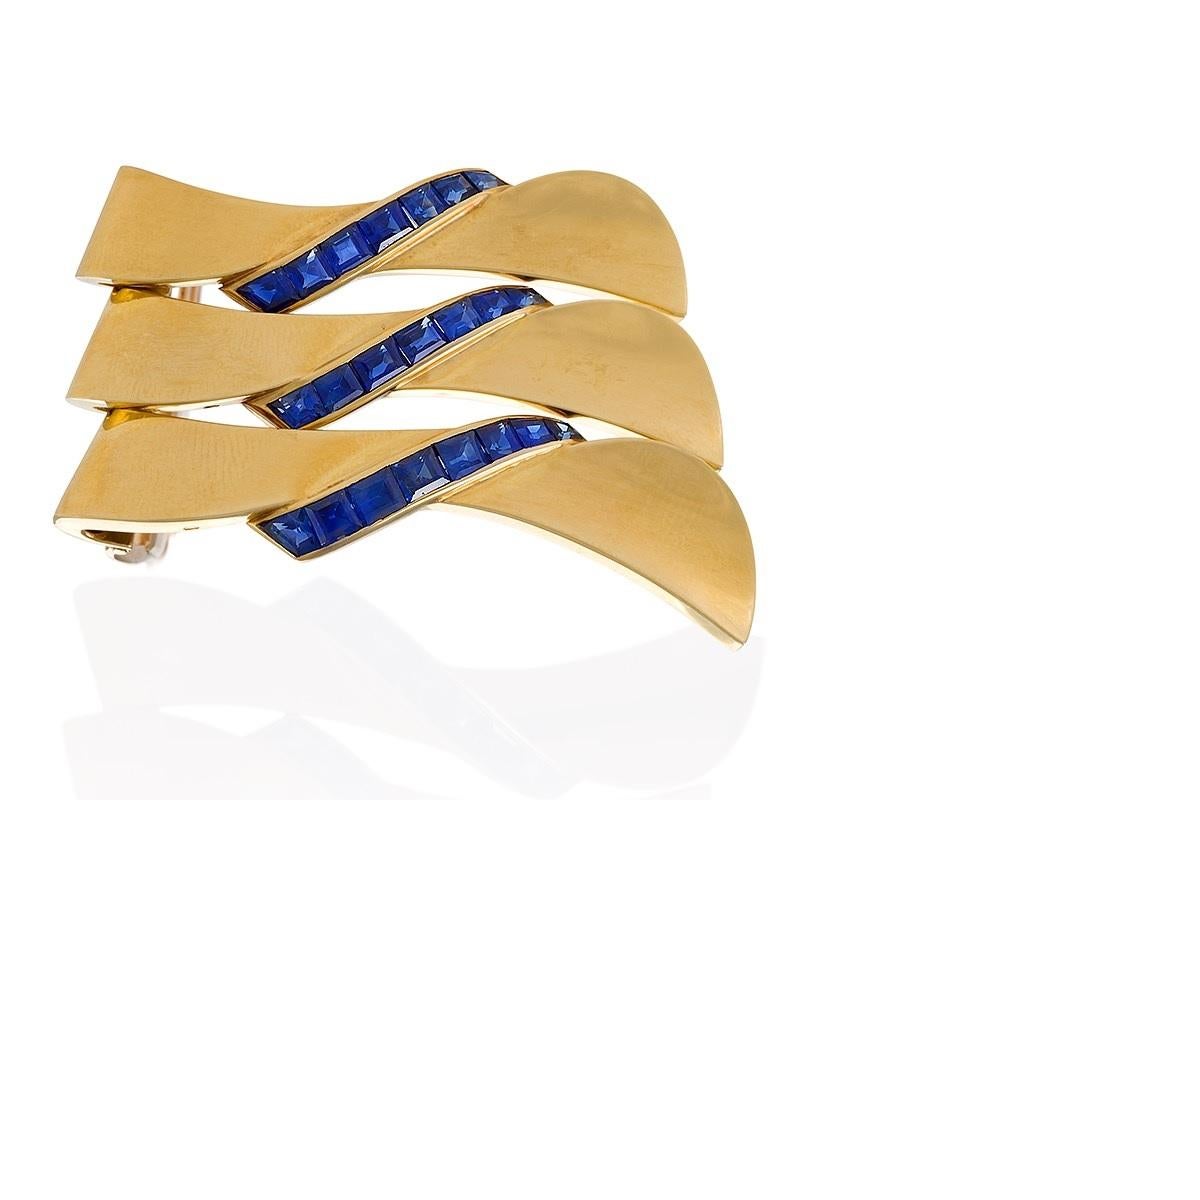 A convertible French 18 karat gold clip brooch with calibre-cut sapphires by Van Cleef & Arpels. The brooch, convertible into a set of three, is highlighted by channel-set lines of 22 calibre-cut sapphires with an approximate total weight of 2.90